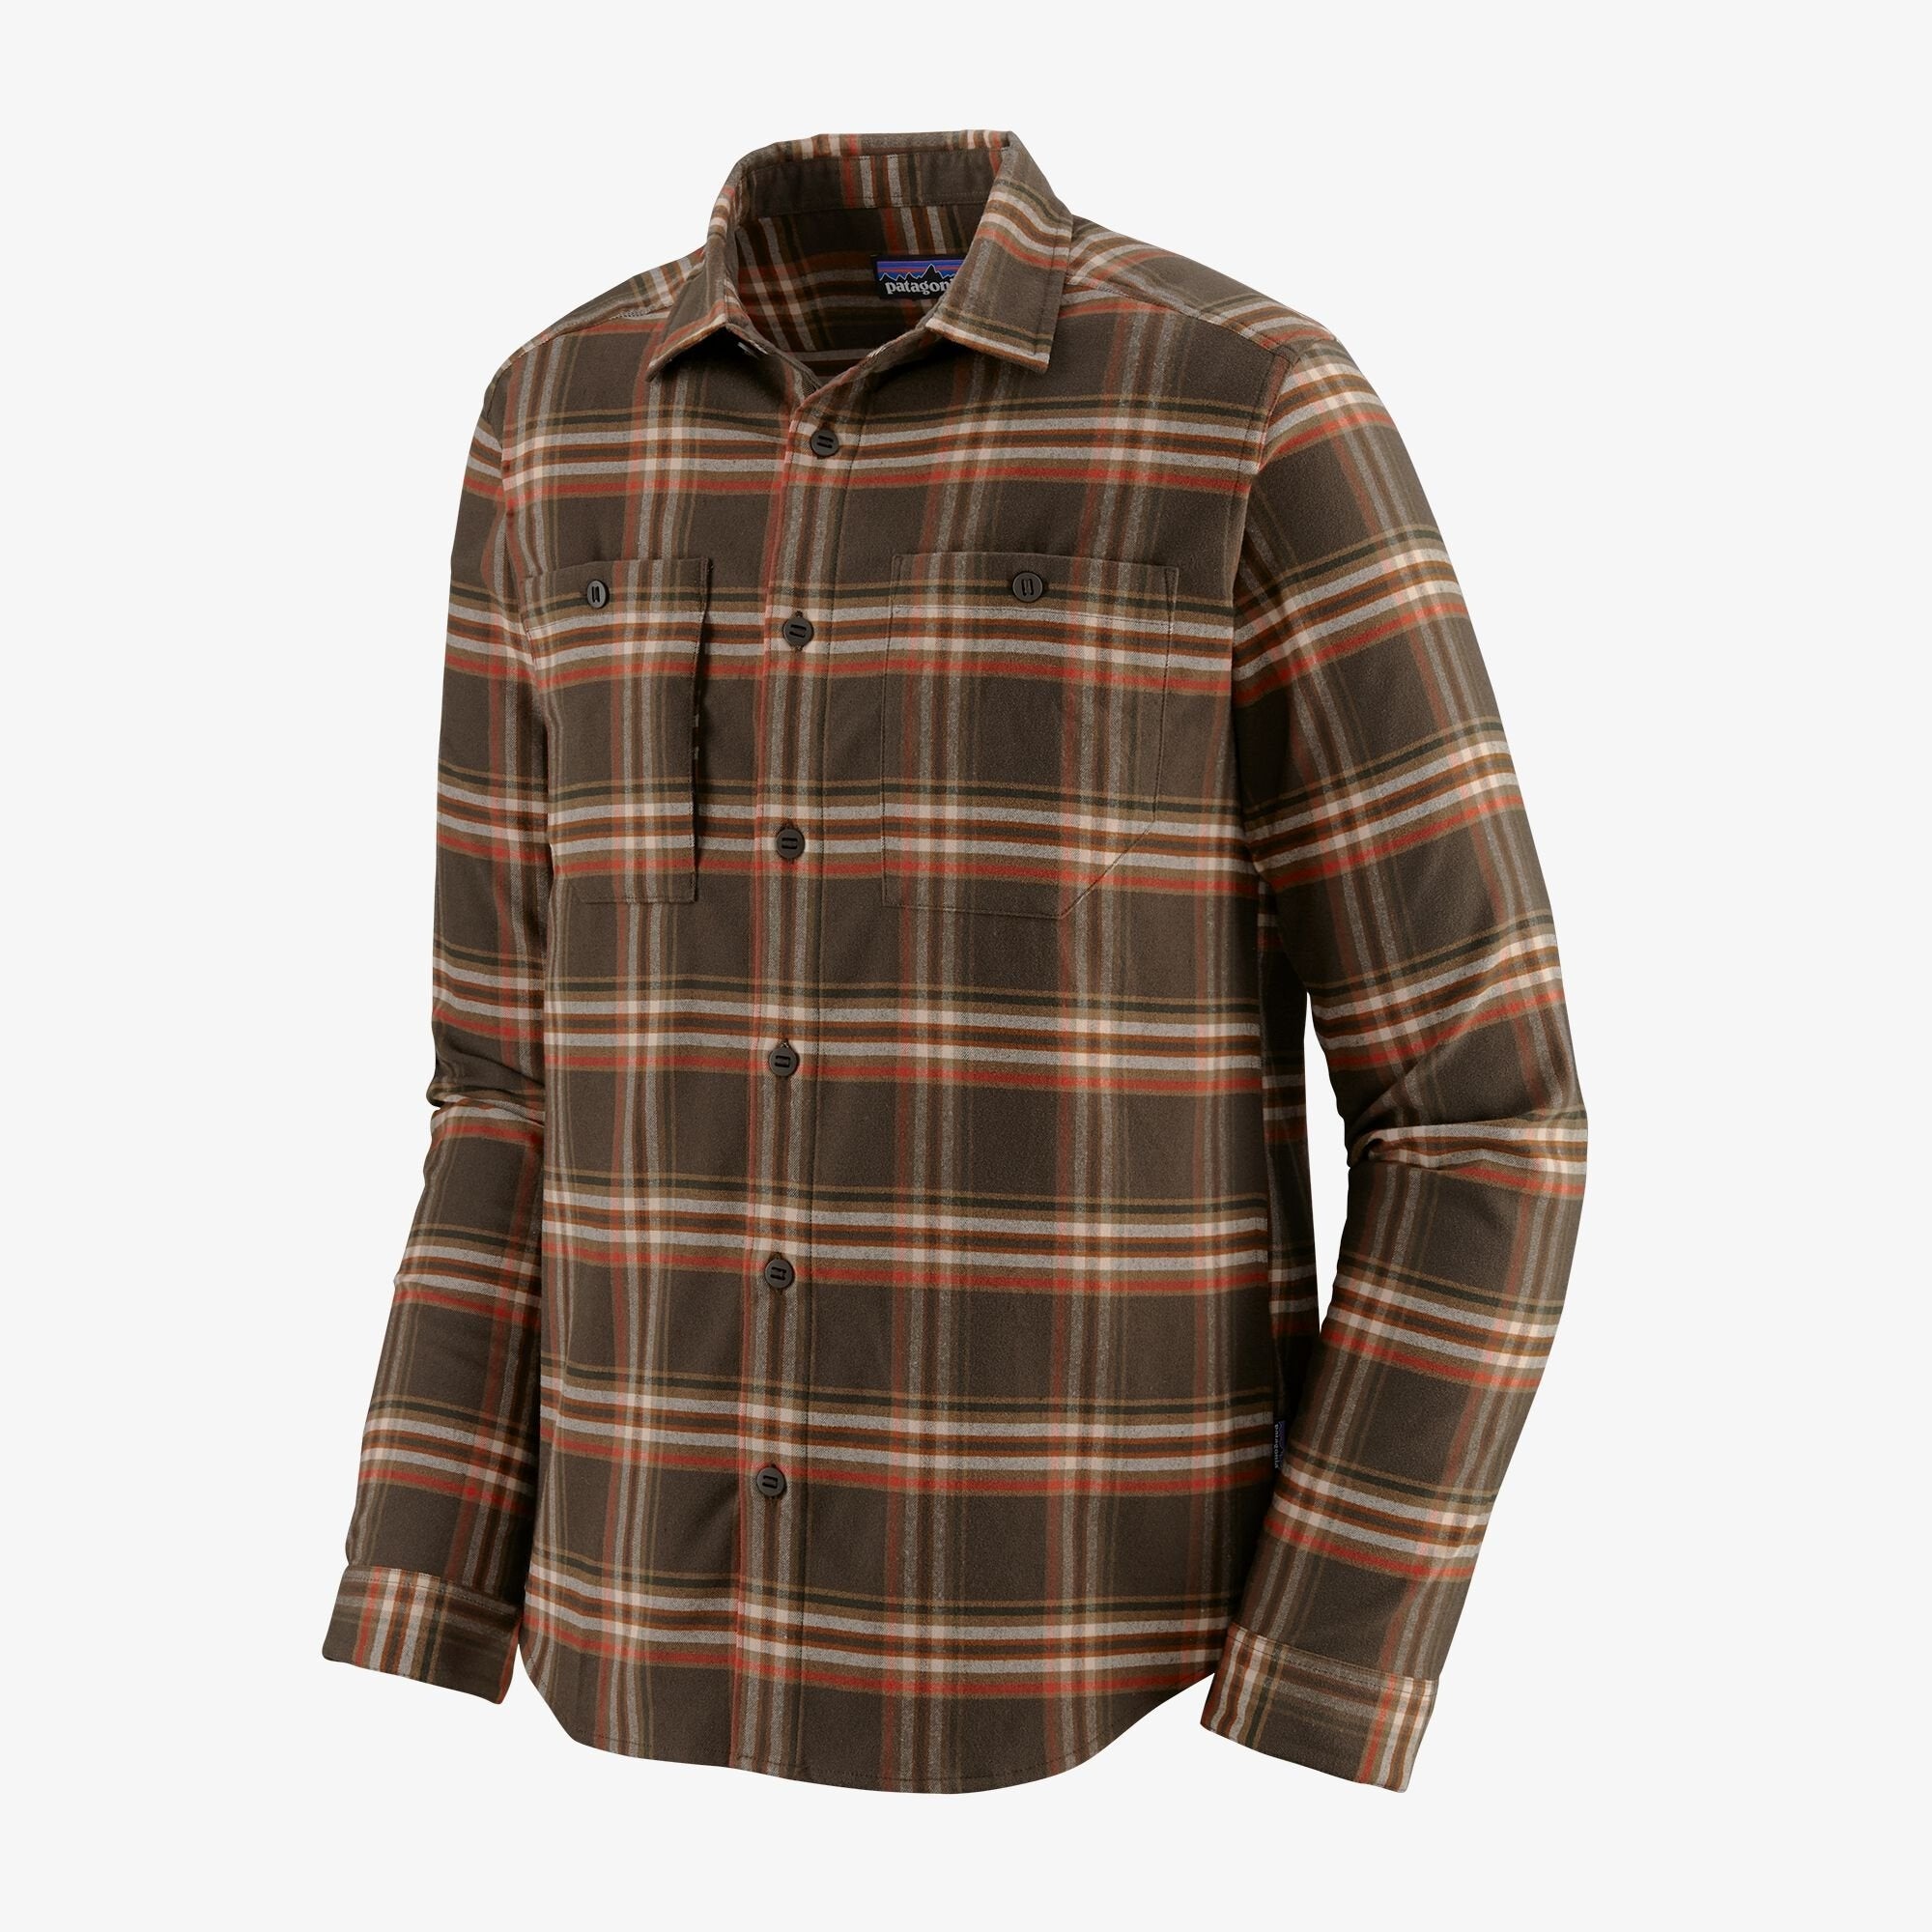 Mens Canyonite Flannel Shirt